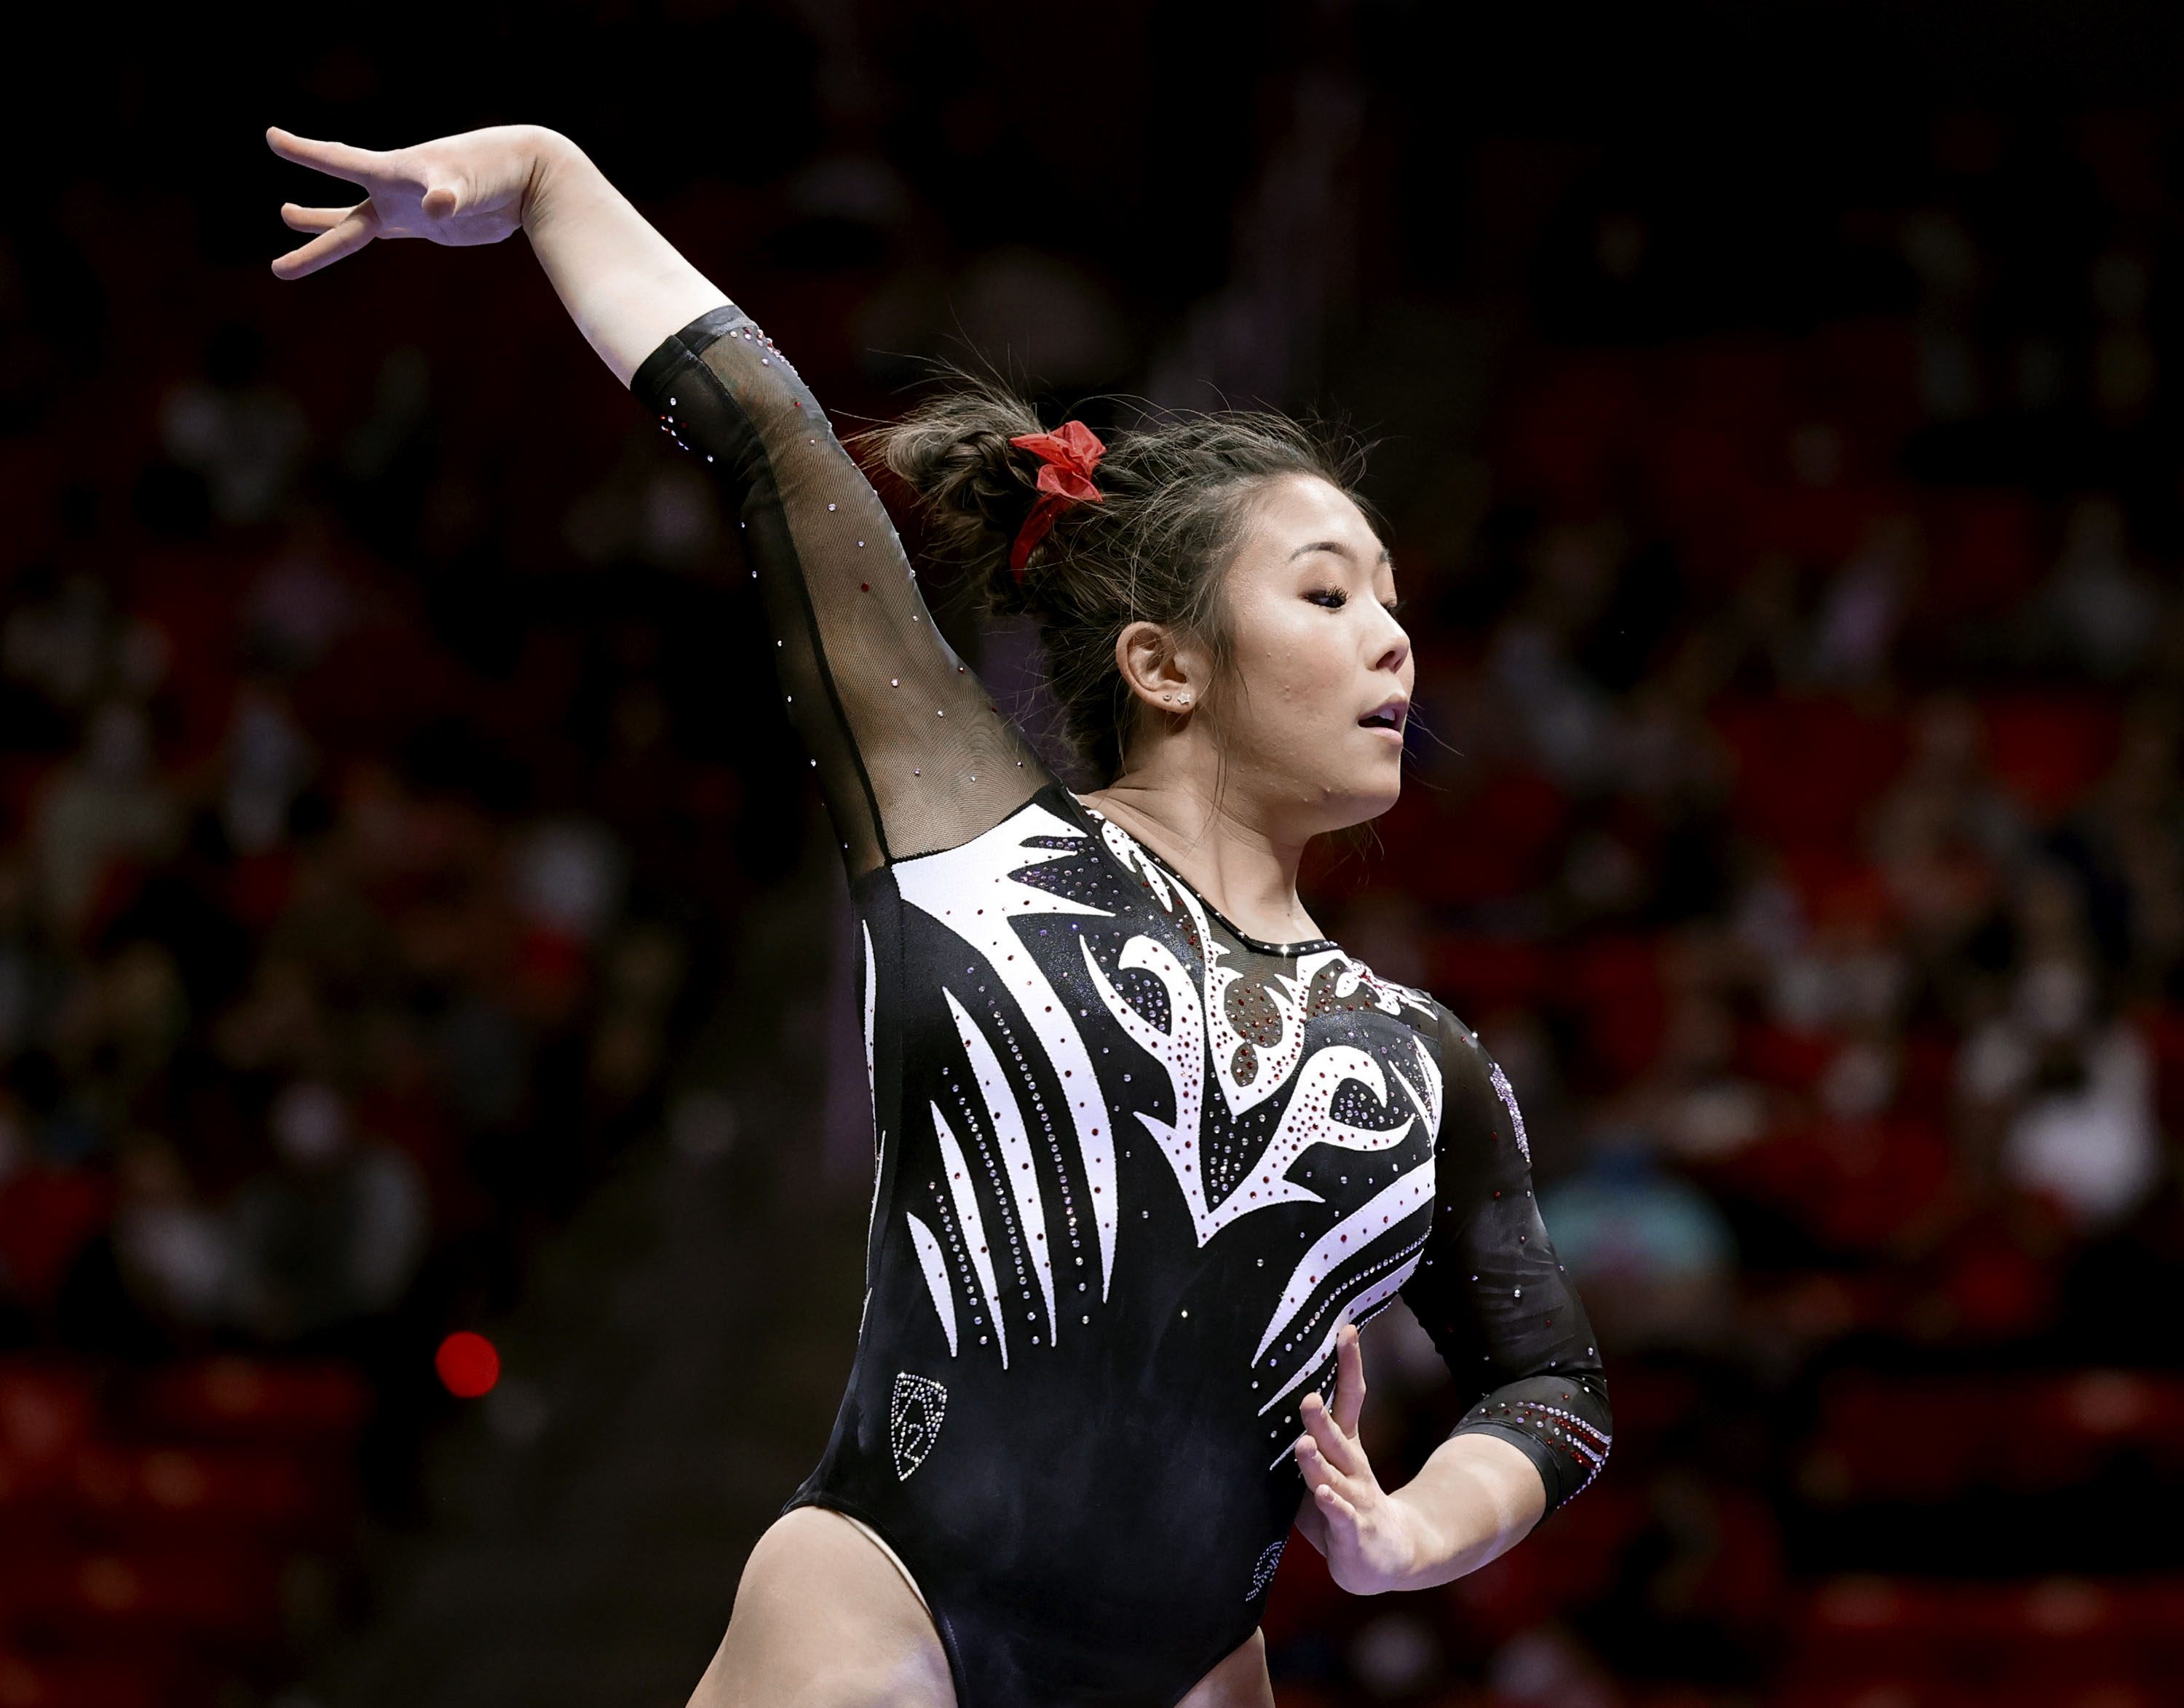 Utah’s Cristal Isa competes on the beam during the gymnastics meet against Arizona State University at the Huntsman Center in Salt Lake City on Friday, Jan. 21, 2022.